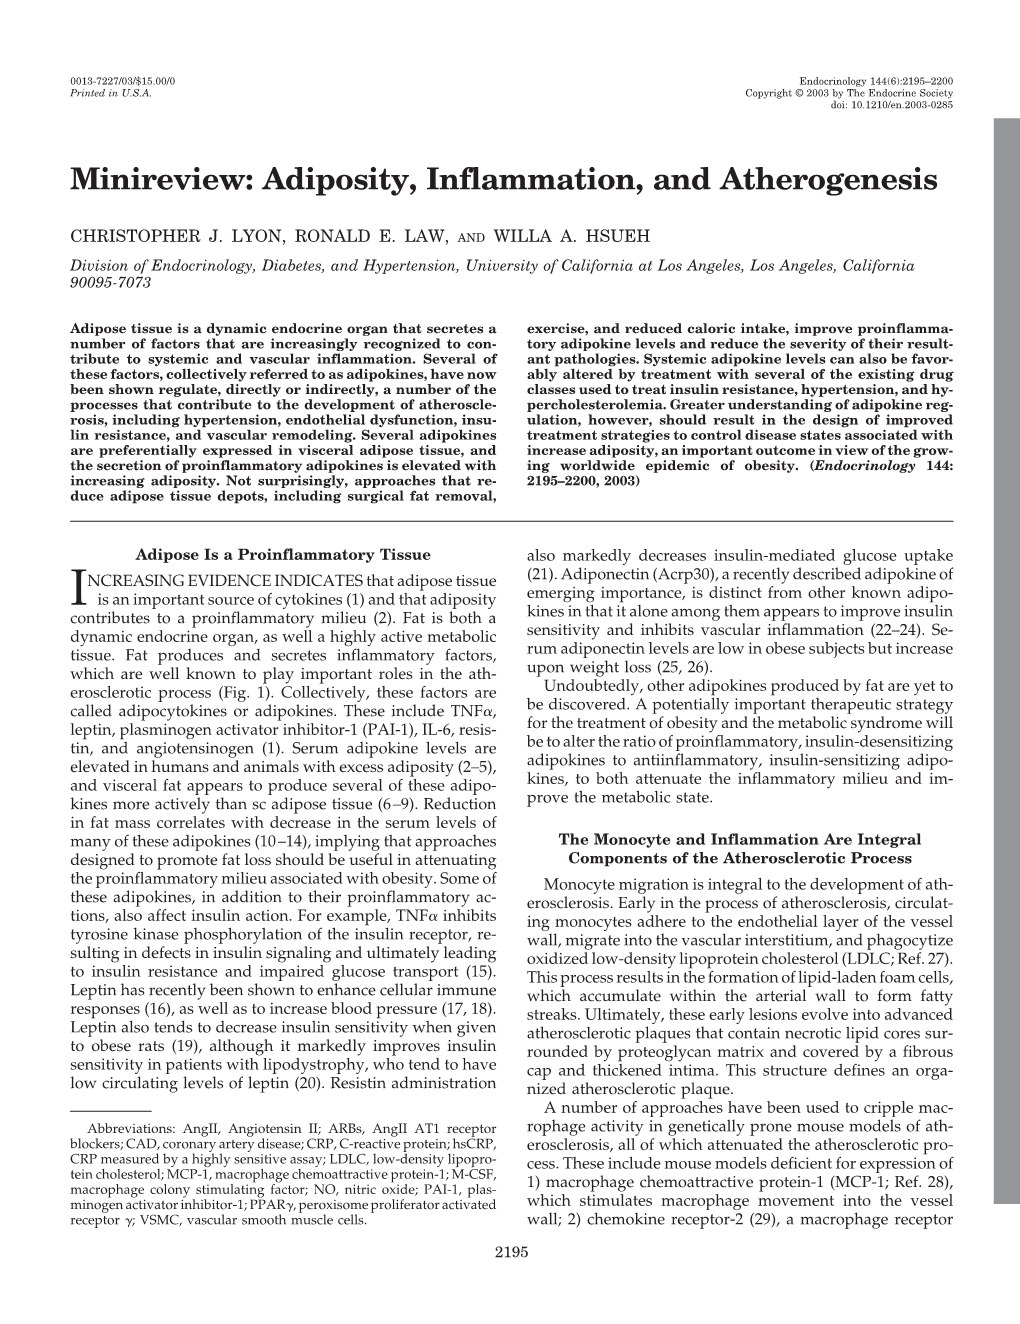 Minireview: Adiposity, Inflammation, and Atherogenesis